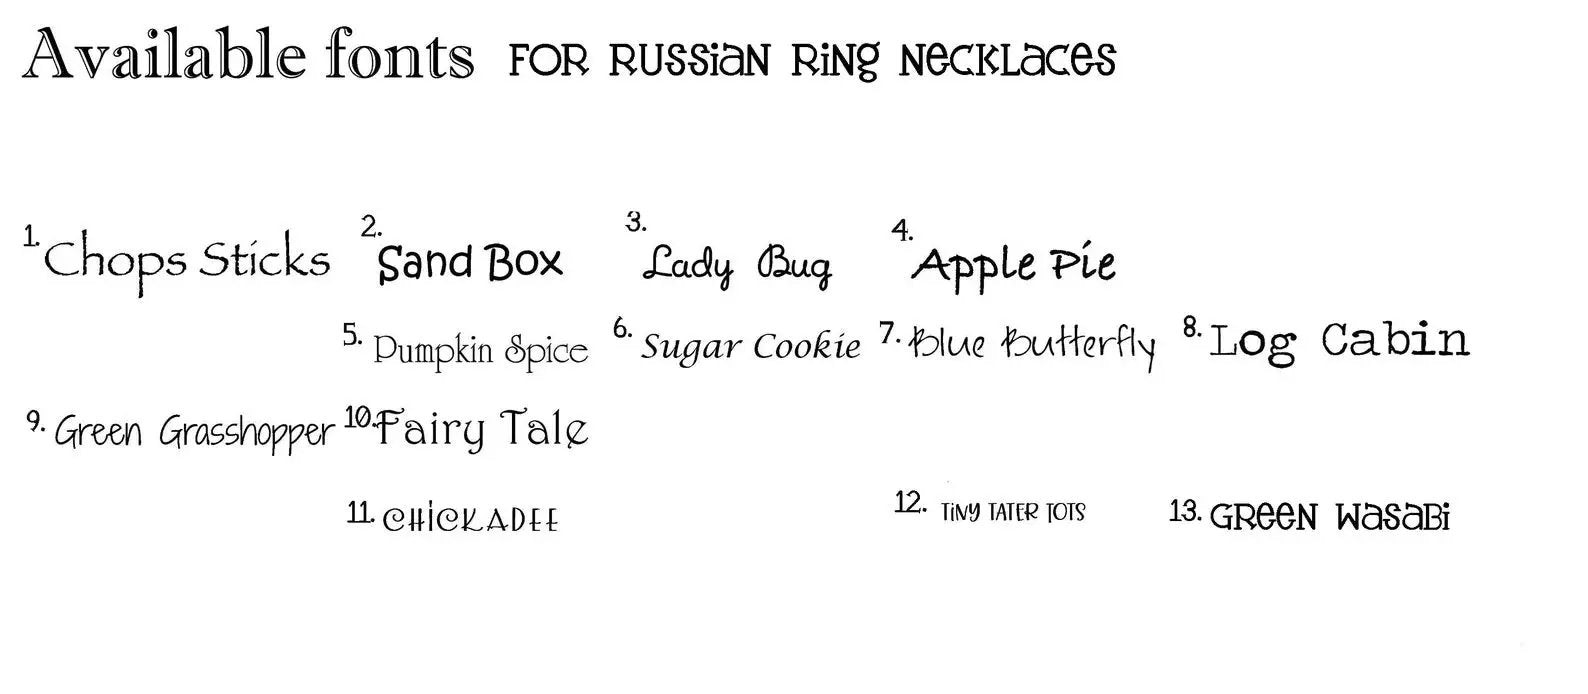 Russian ring necklace